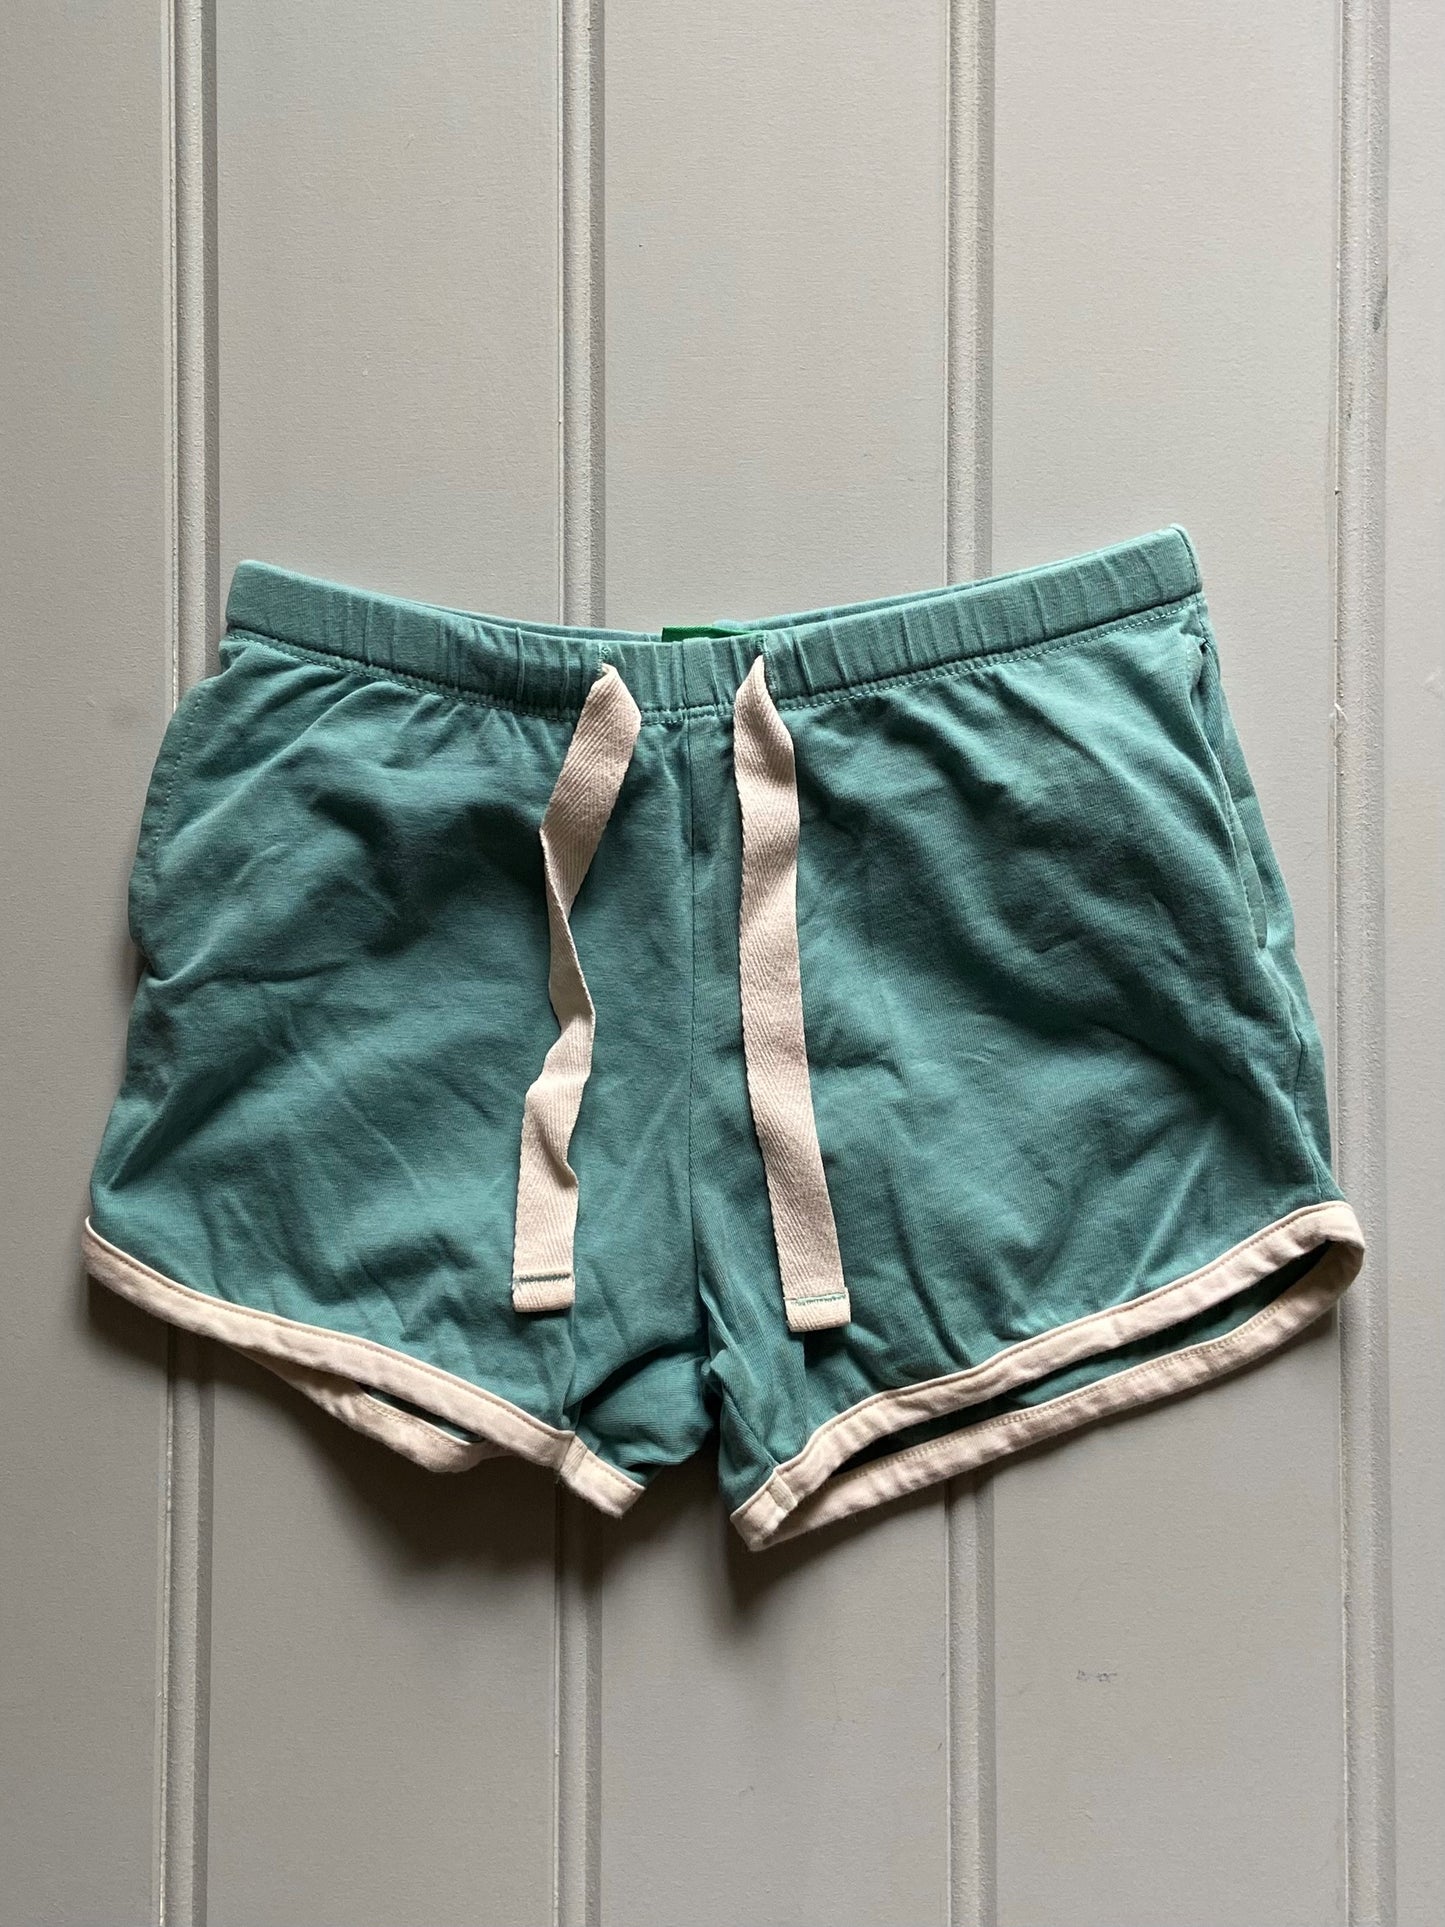 Pre-loved Retro Shorts by Little Green Radicals